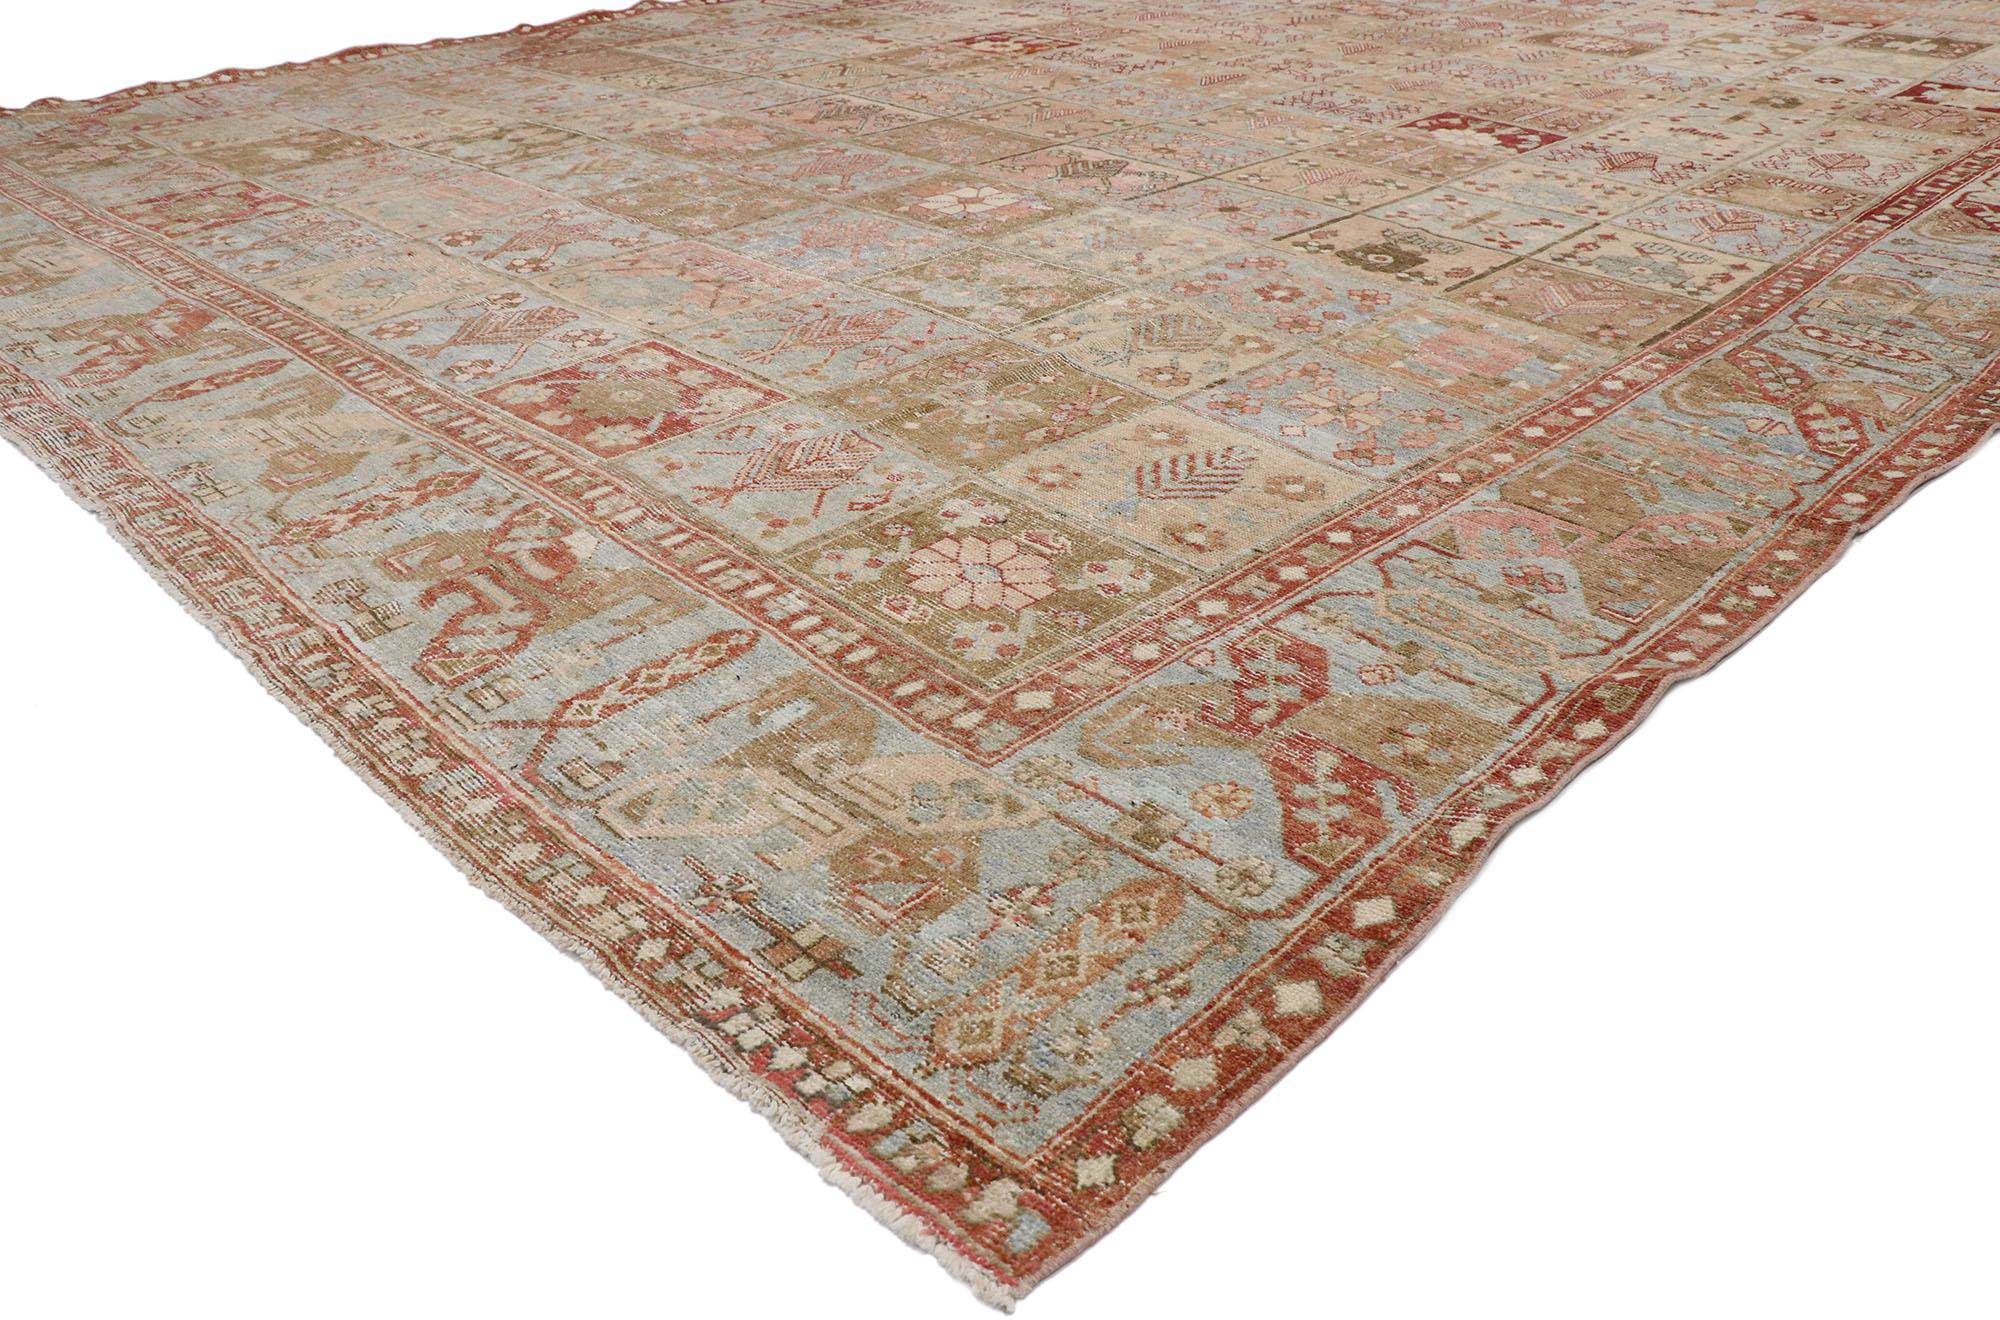 53388, distressed antique Persian Bakhtiari rug with modern French Rustic style. With its perfectly worn-in charm and rustic sensibility, this hand knotted wool distressed antique Persian Bakhtiari rug takes on a curated lived-in look that feels